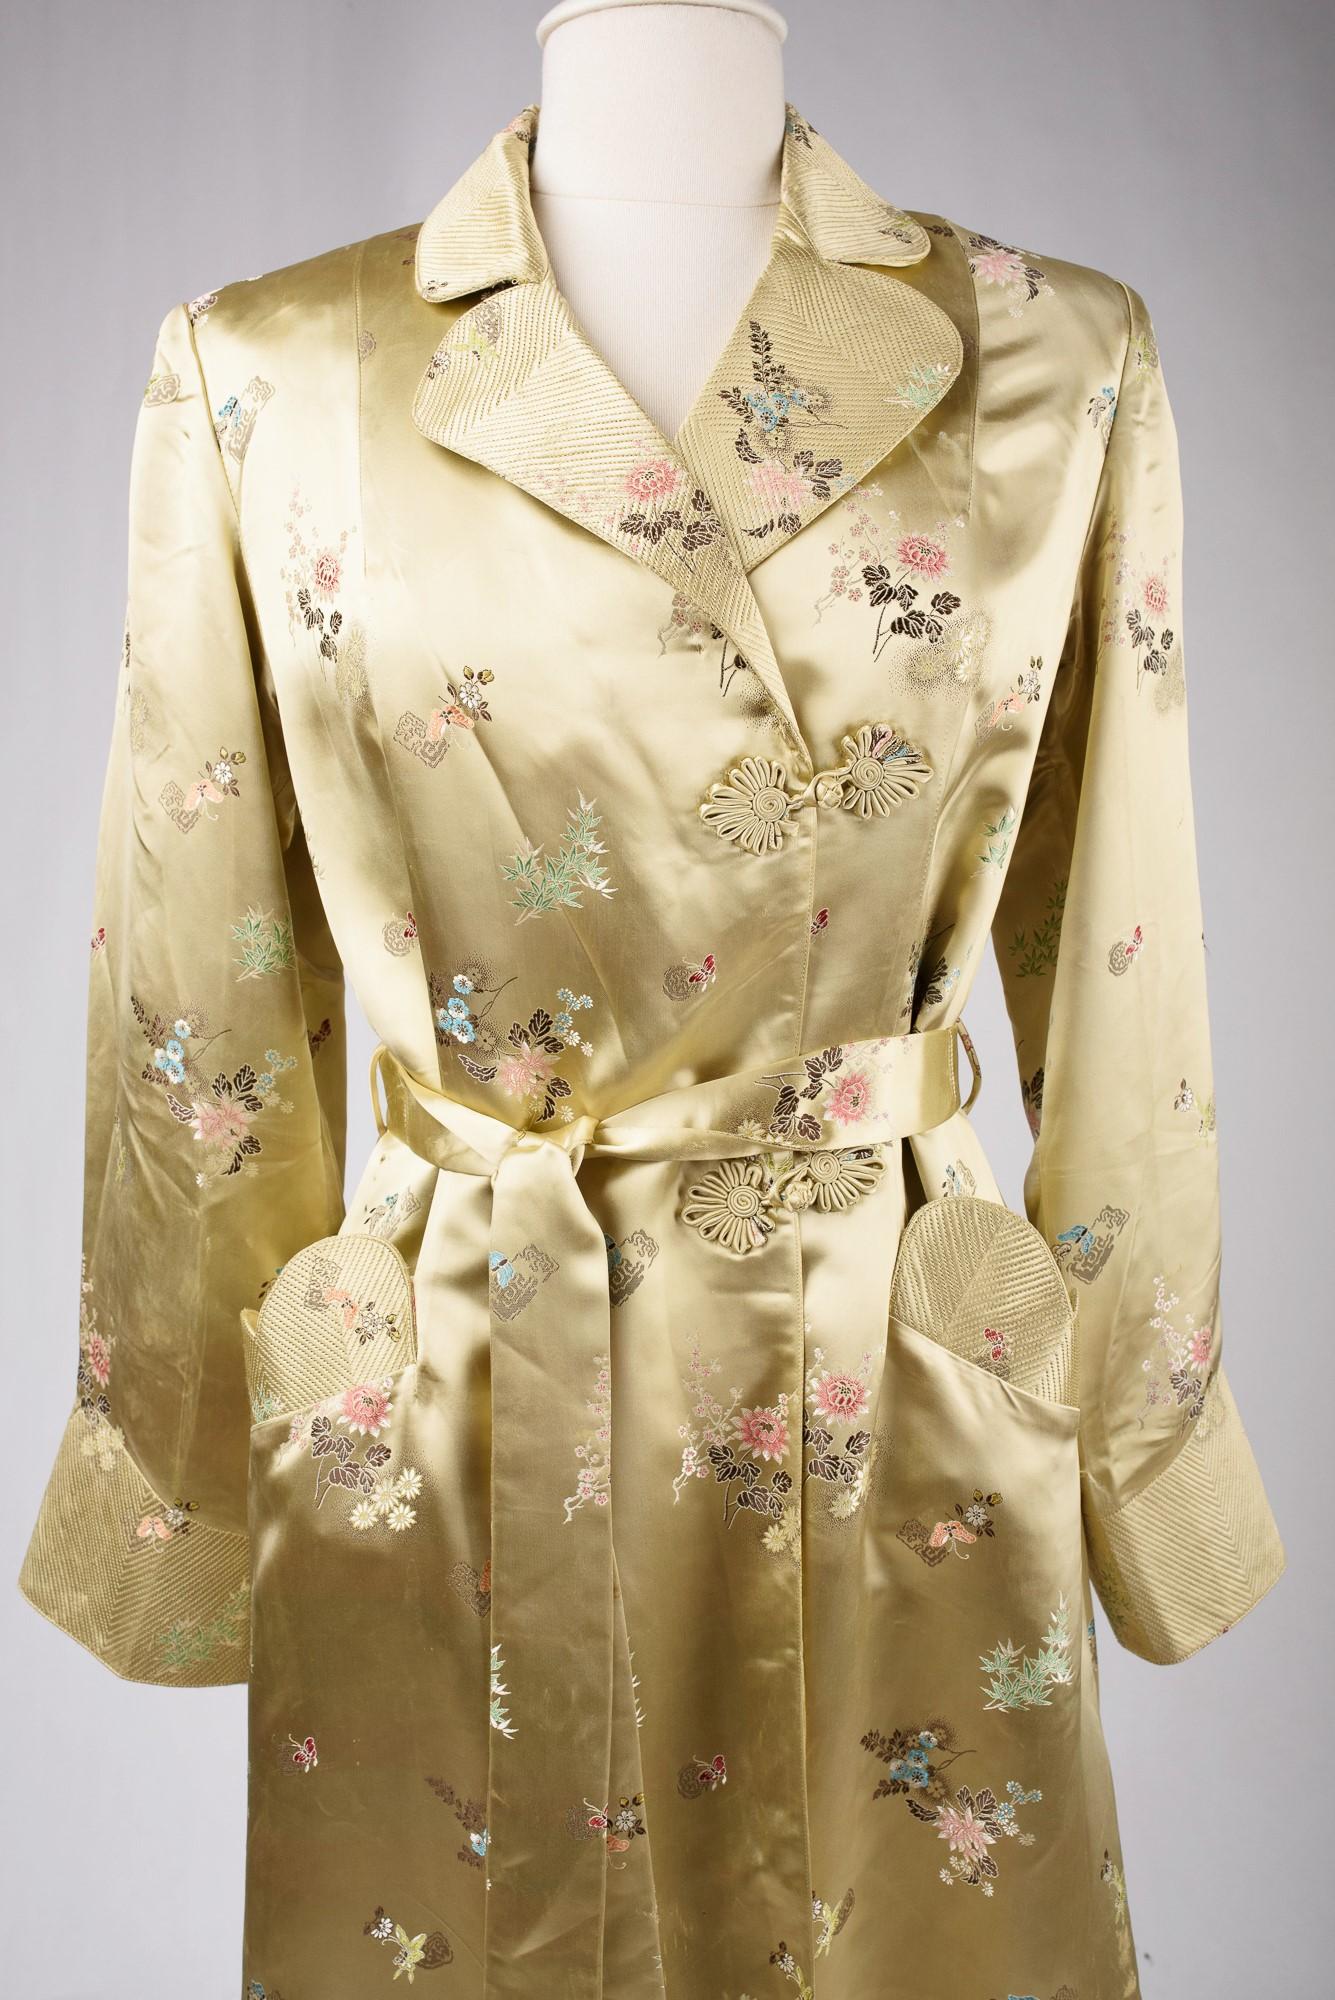 Circa 1940-1950

China for export to Europe

Beautiful 1940's gown or dressing gown for the reception in shiny straw yellow silk satin embroidered with a japanese flower pattern. Loose coat, crossed in front and closed by bells in matching silk